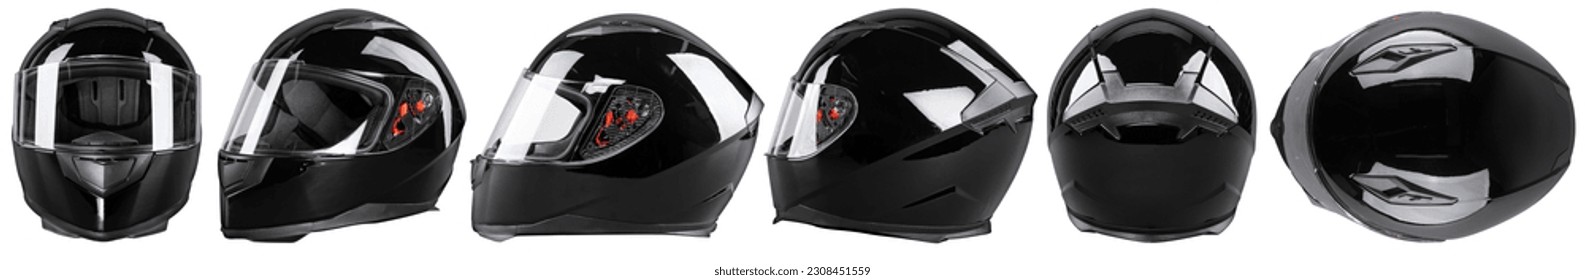 set collection of black motorcycle carbon integral crash helmet isolated in various angles on white background. motorsport car kart racing transportation safety concept